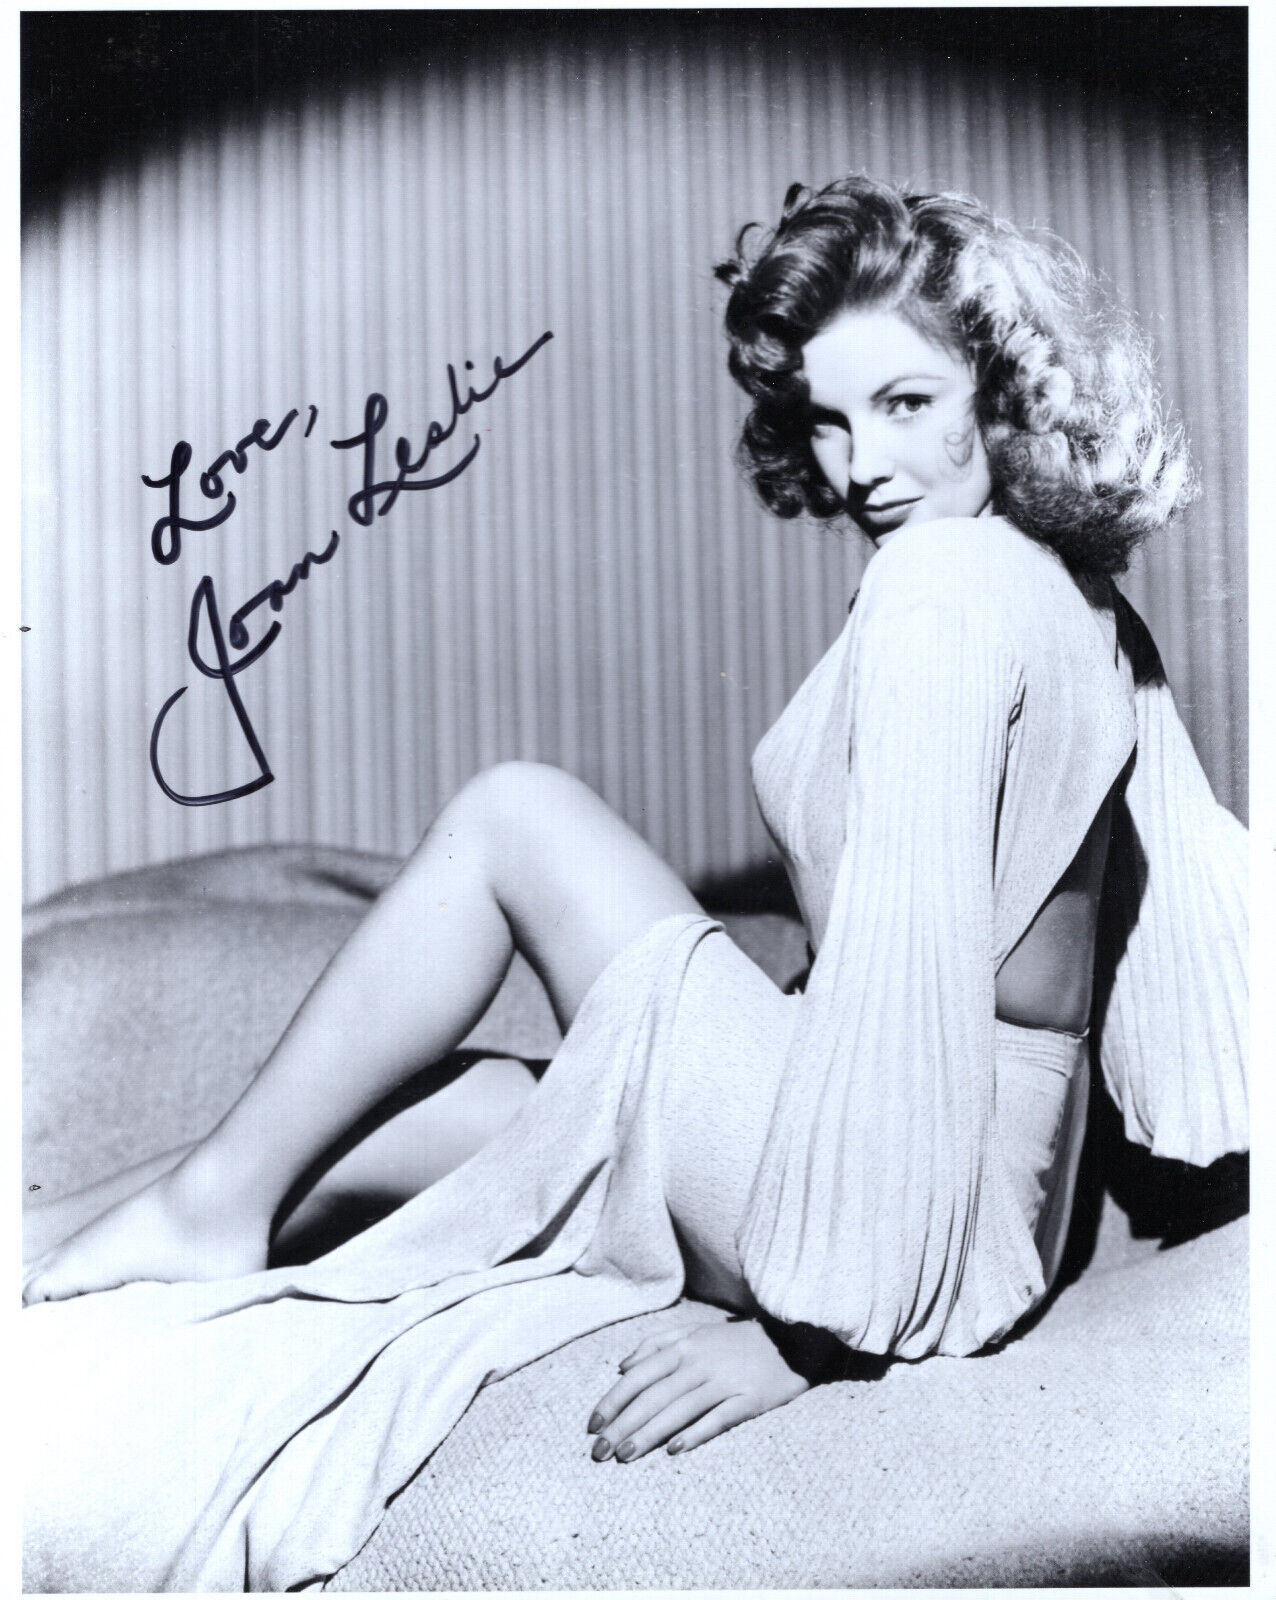 JOAN LESLIE HAND SIGNED 8x10 PHOTO+COA           GORGEOUS+VERY SEXY POSE